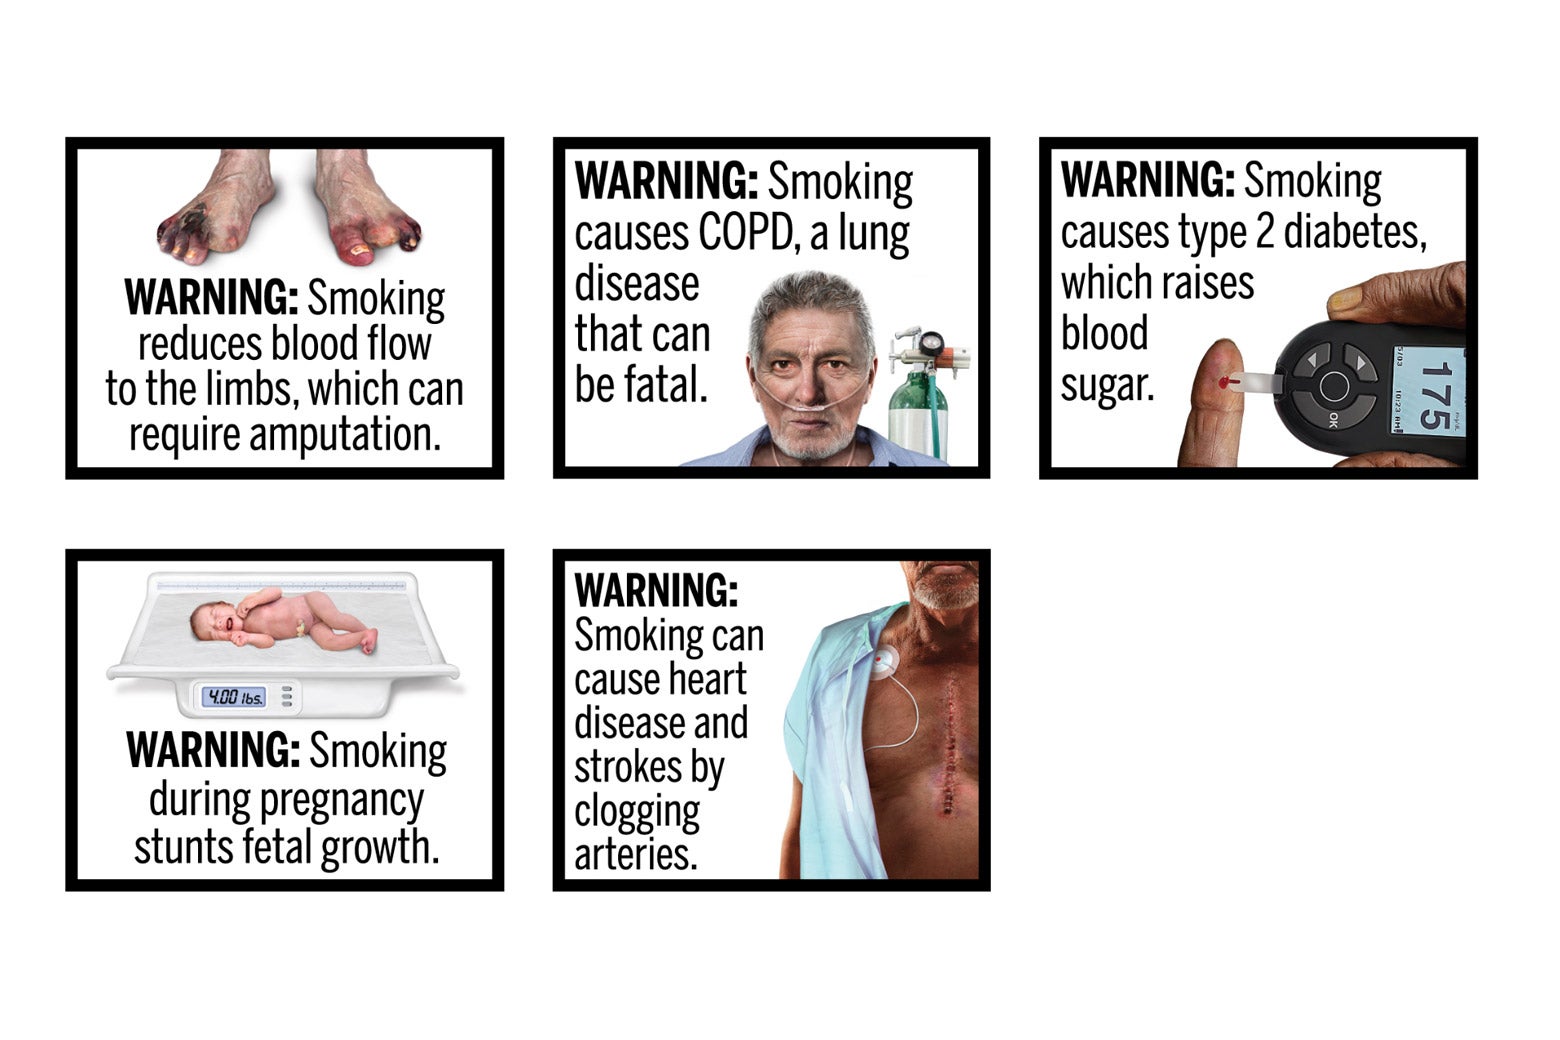 The next five images in the series of 11 uncommon smoking side effects, including "Smoking during pregnancy stunts fetal growth," along with a thumbnail image of a small infant on a scale.